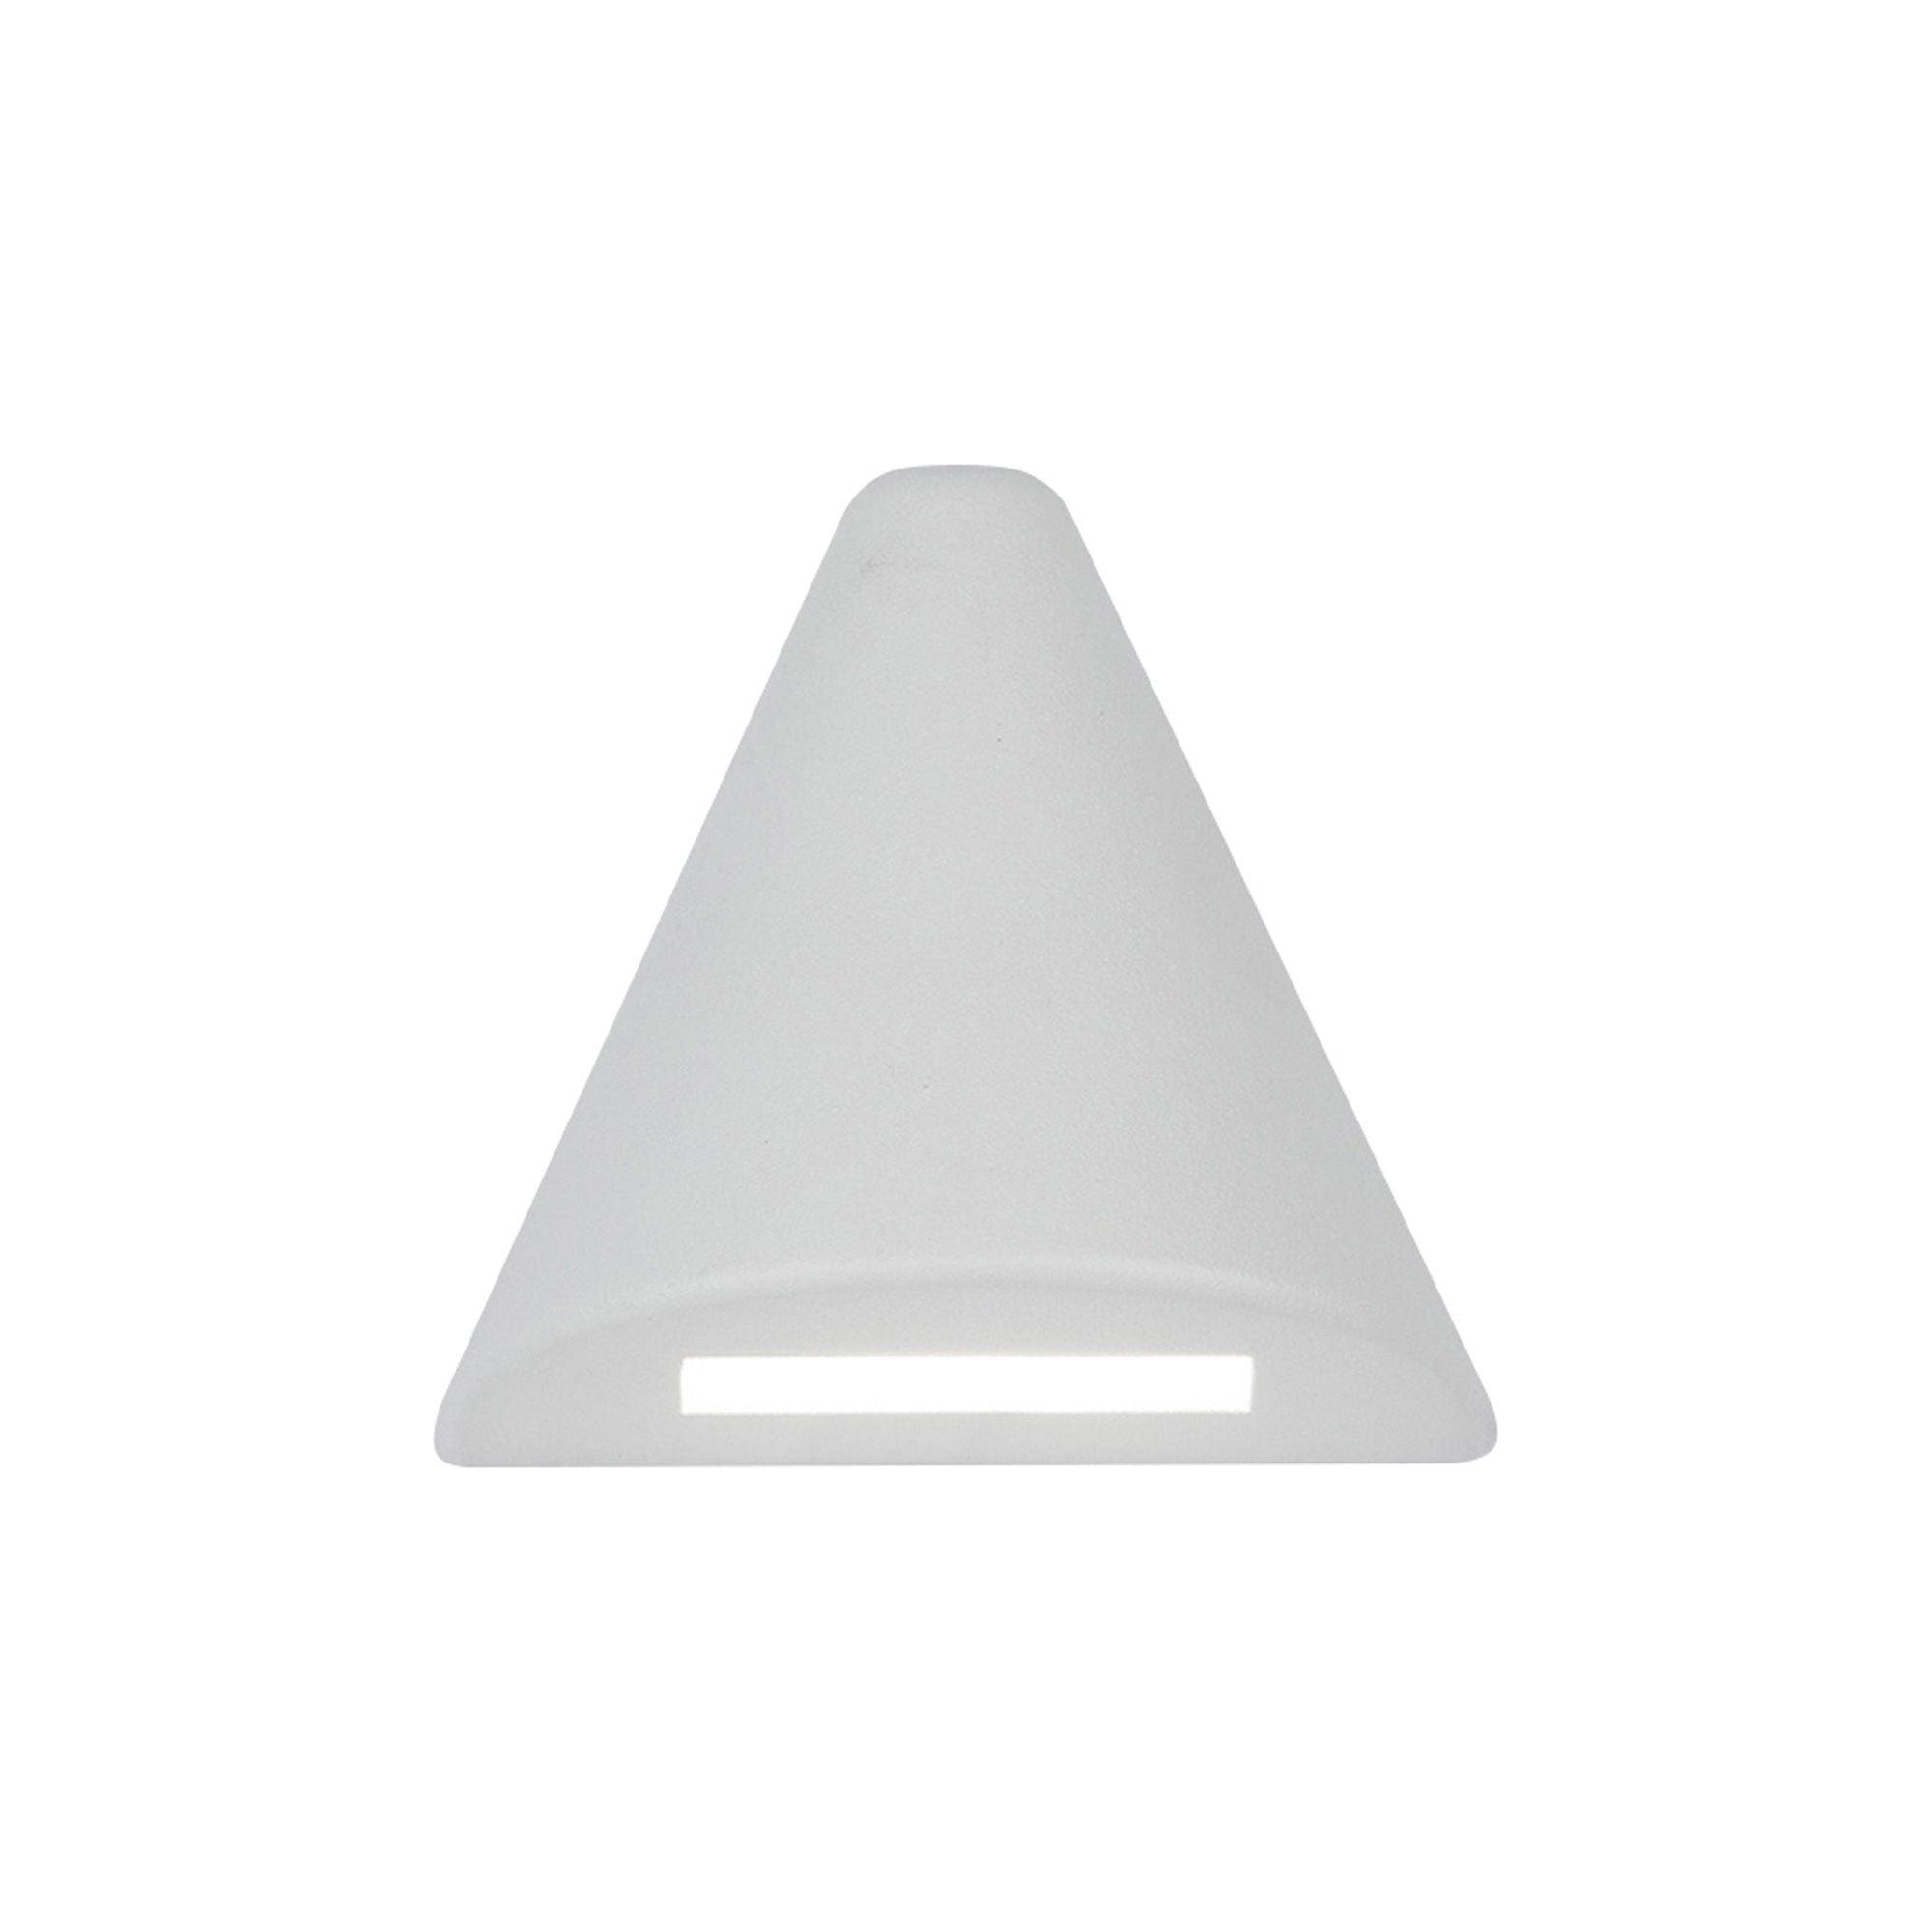 WAC Lighting - Cone LED 12V Deck and Patio Light - Lights Canada